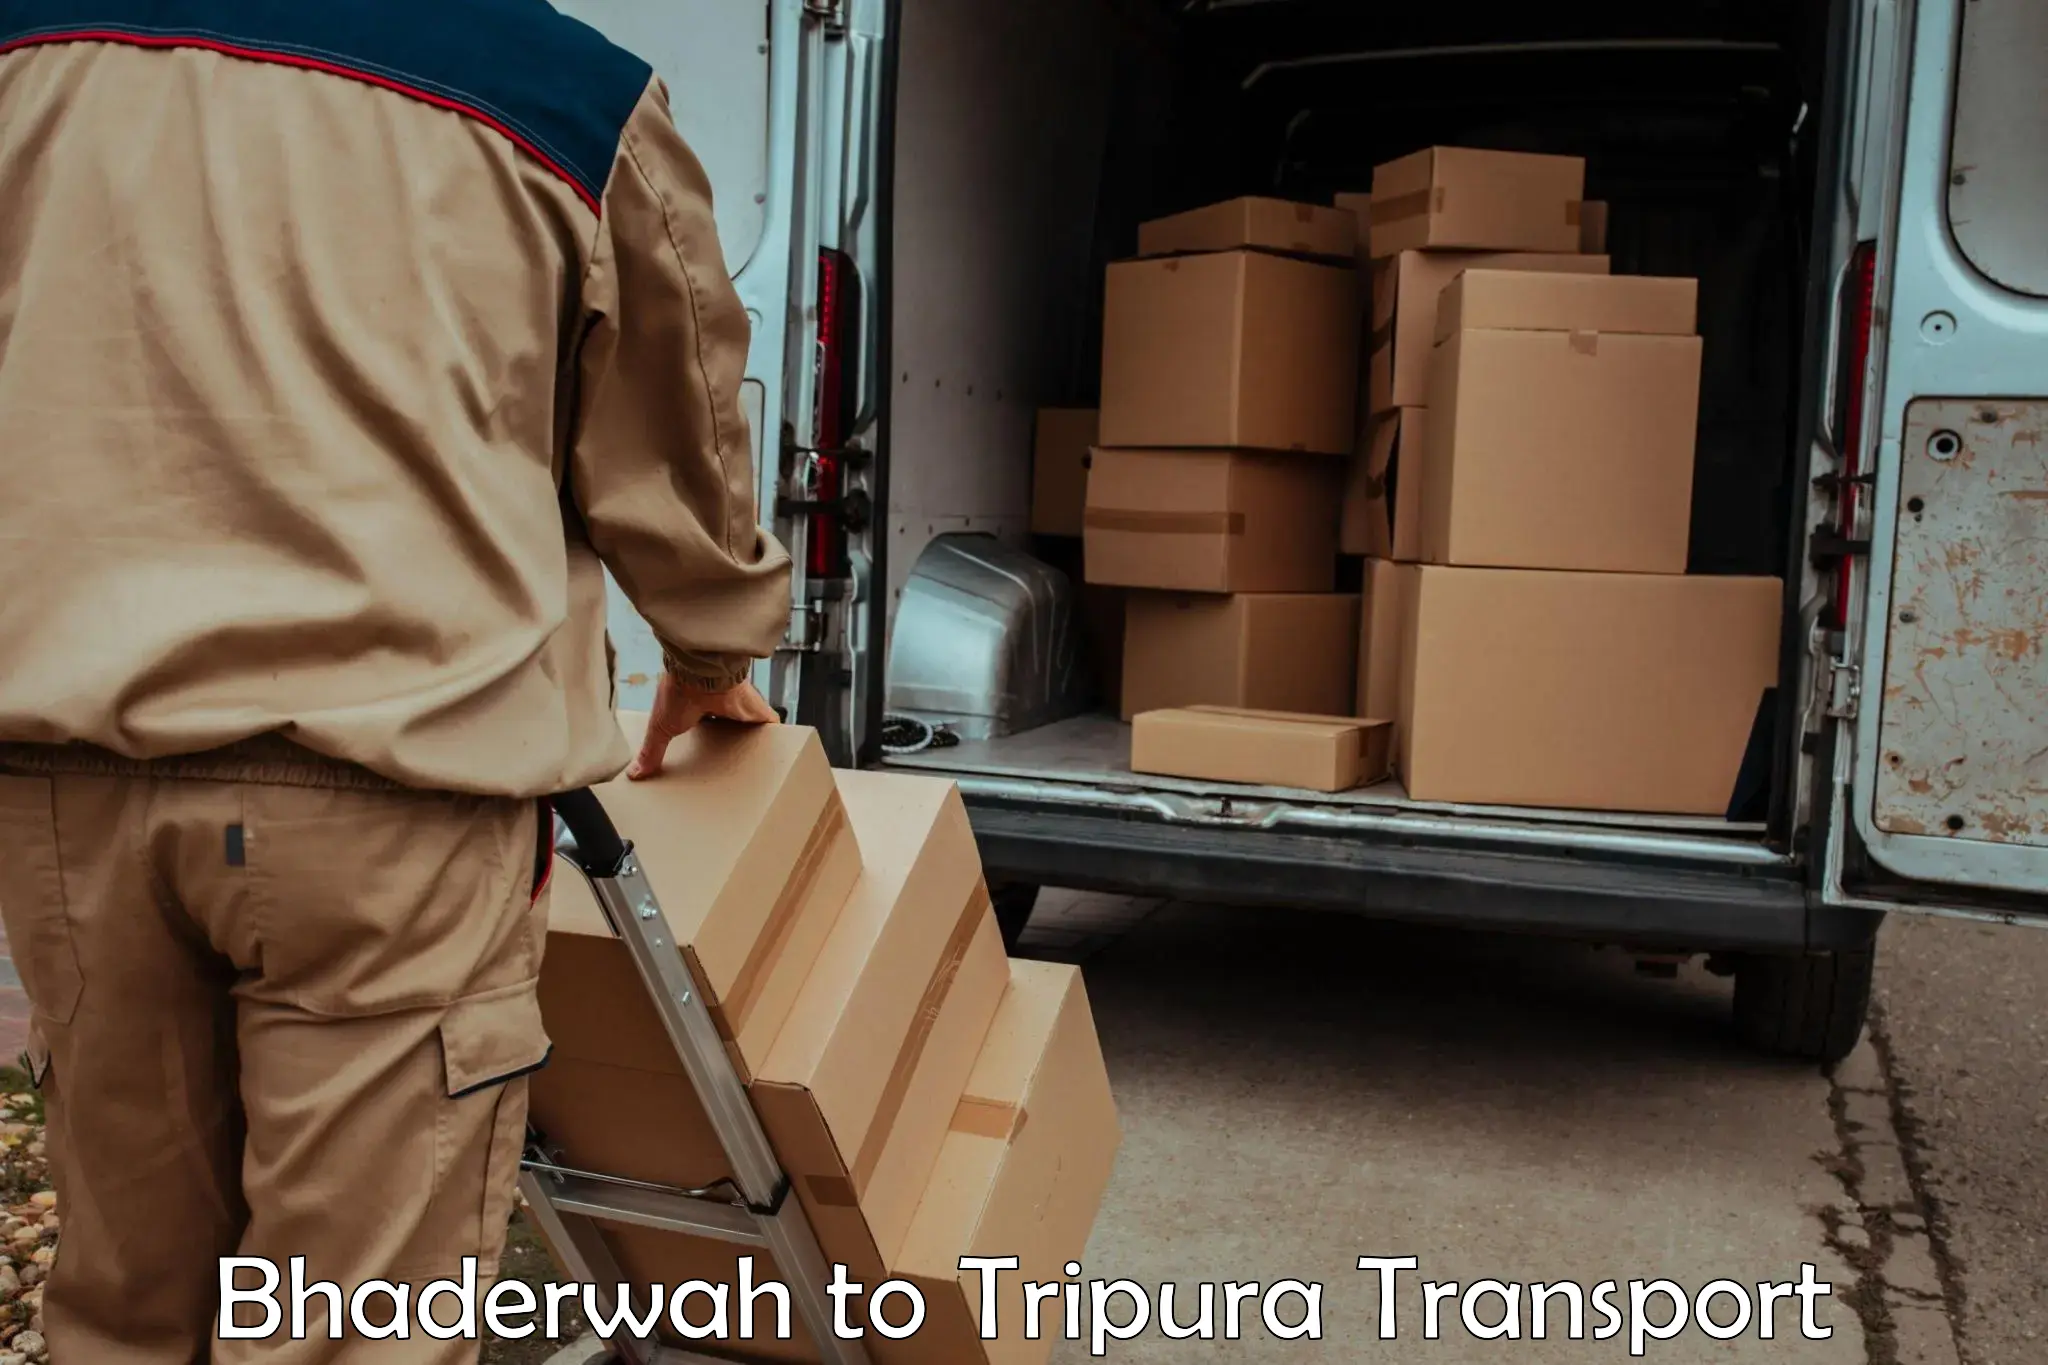 Road transport services Bhaderwah to Udaipur Tripura